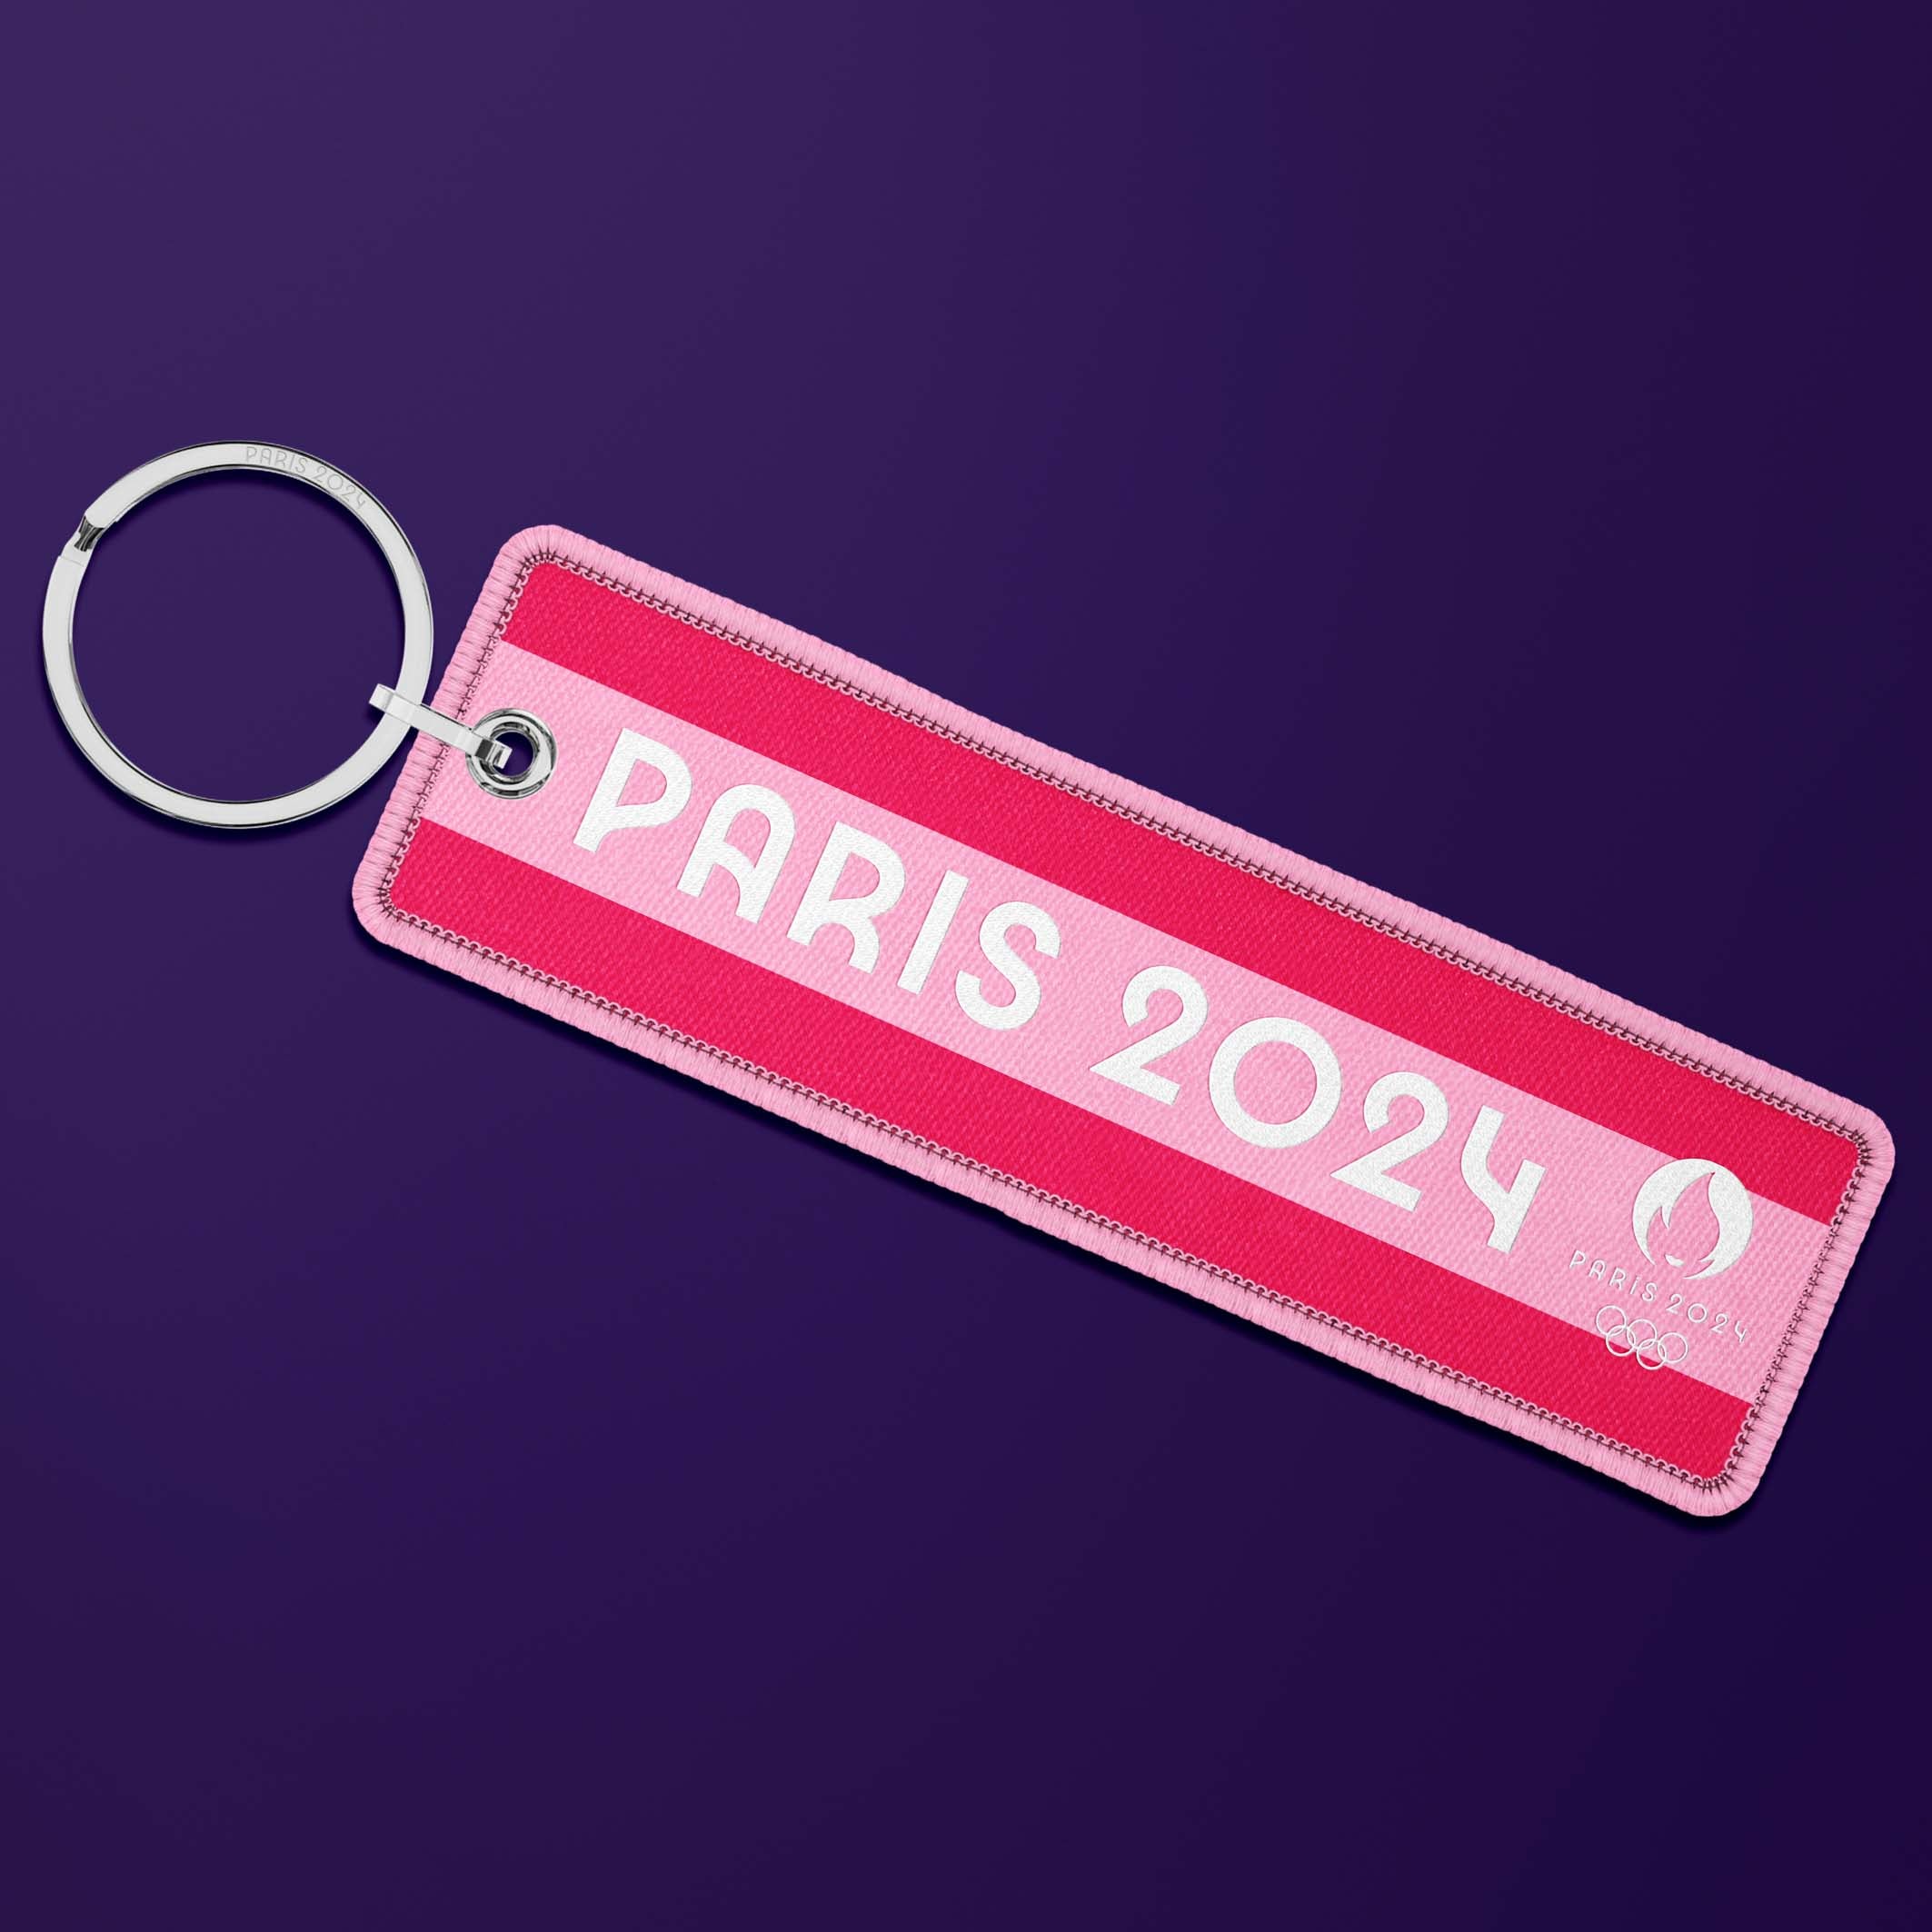 Paris 2024 Sports &amp; Stripes flame key ring - 7th rugby